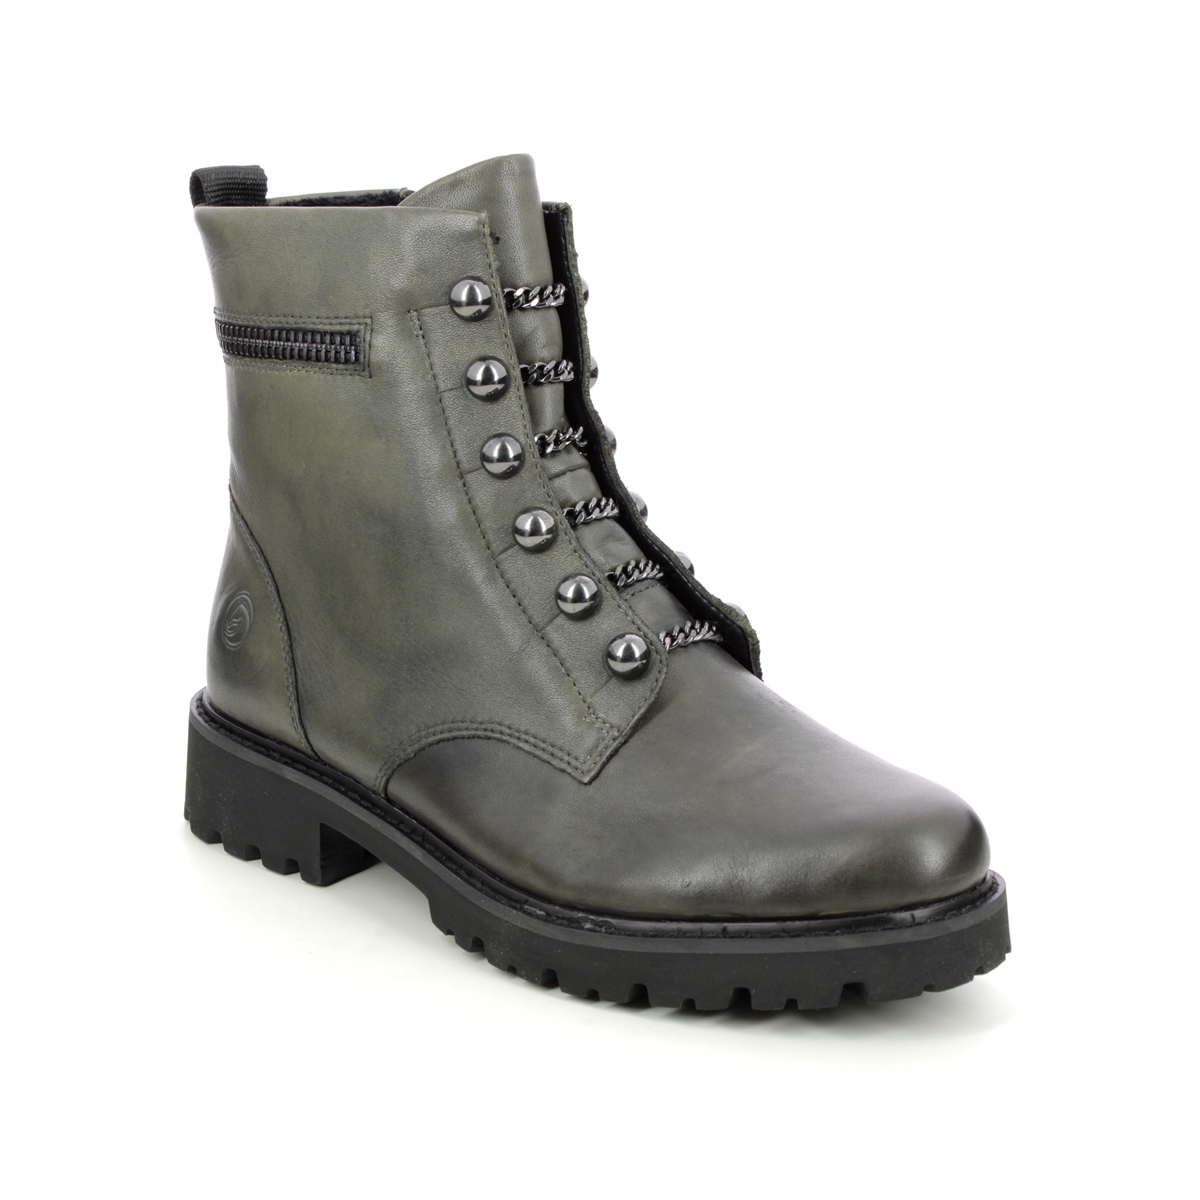 Remonte Docland Olive Leather Womens Biker Boots D8670-52 In Size 37 In Plain Olive Leather